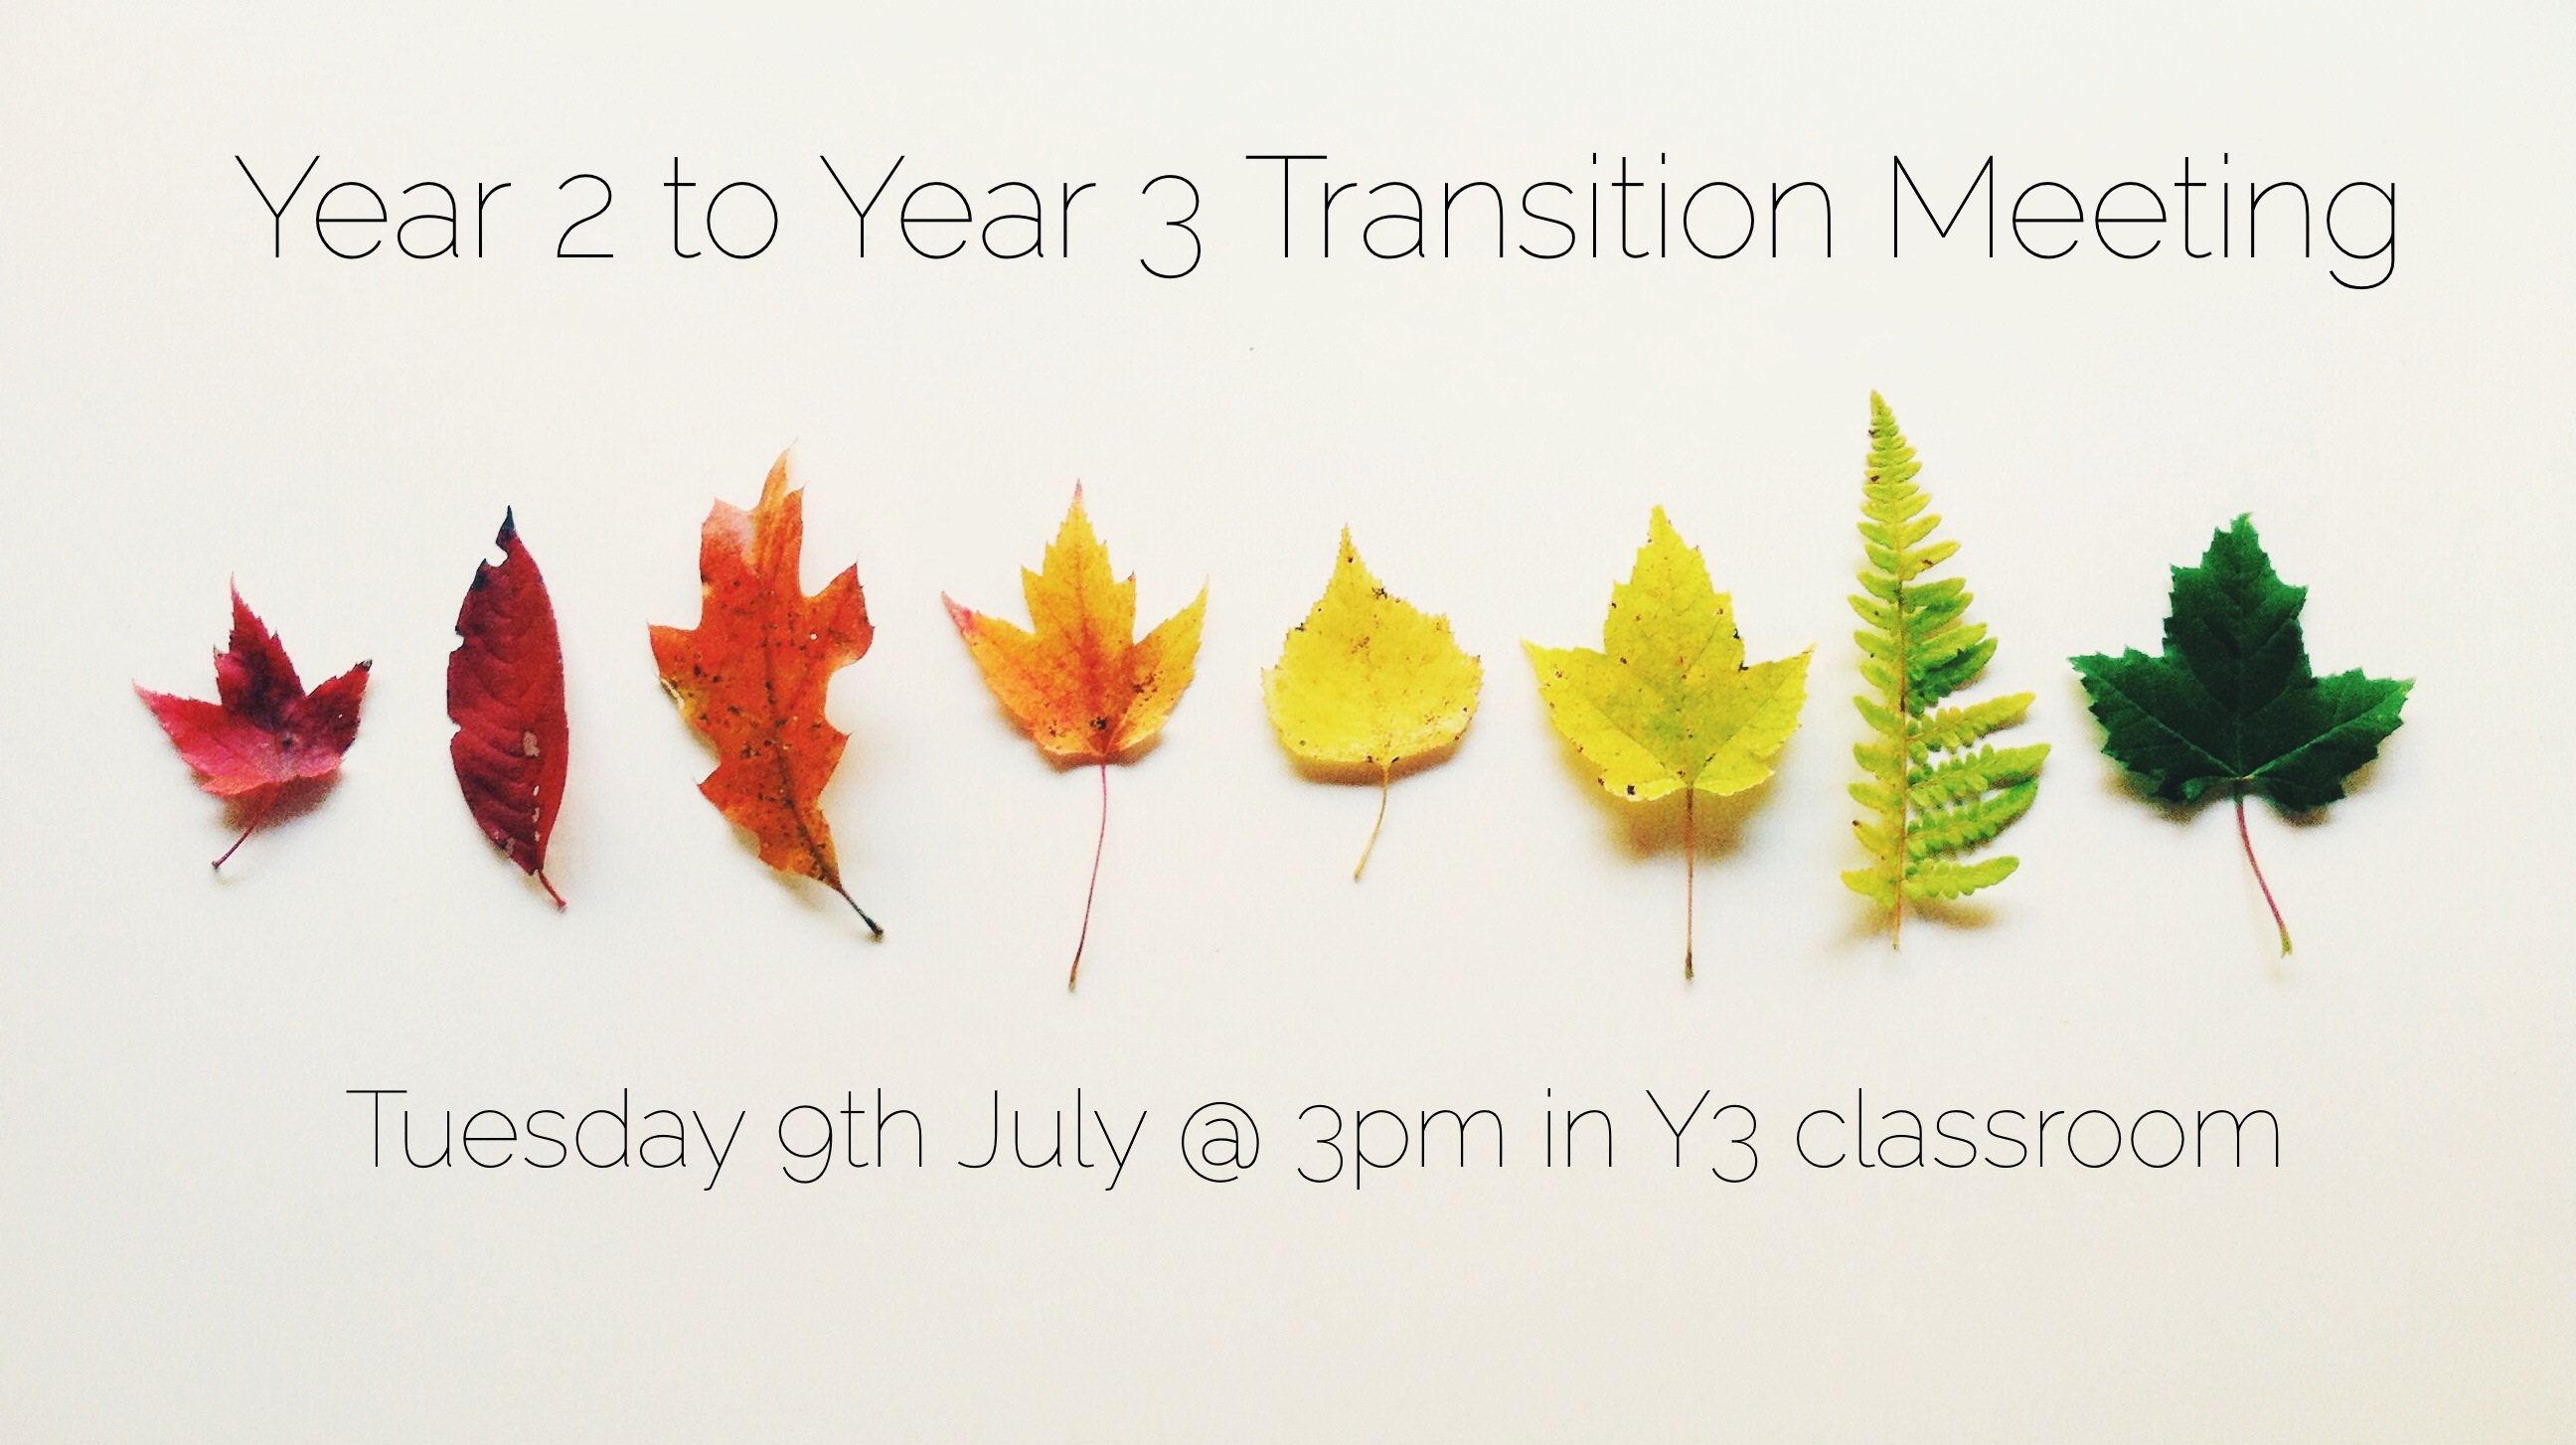 Year 2 to Year 3 Transition Meeting